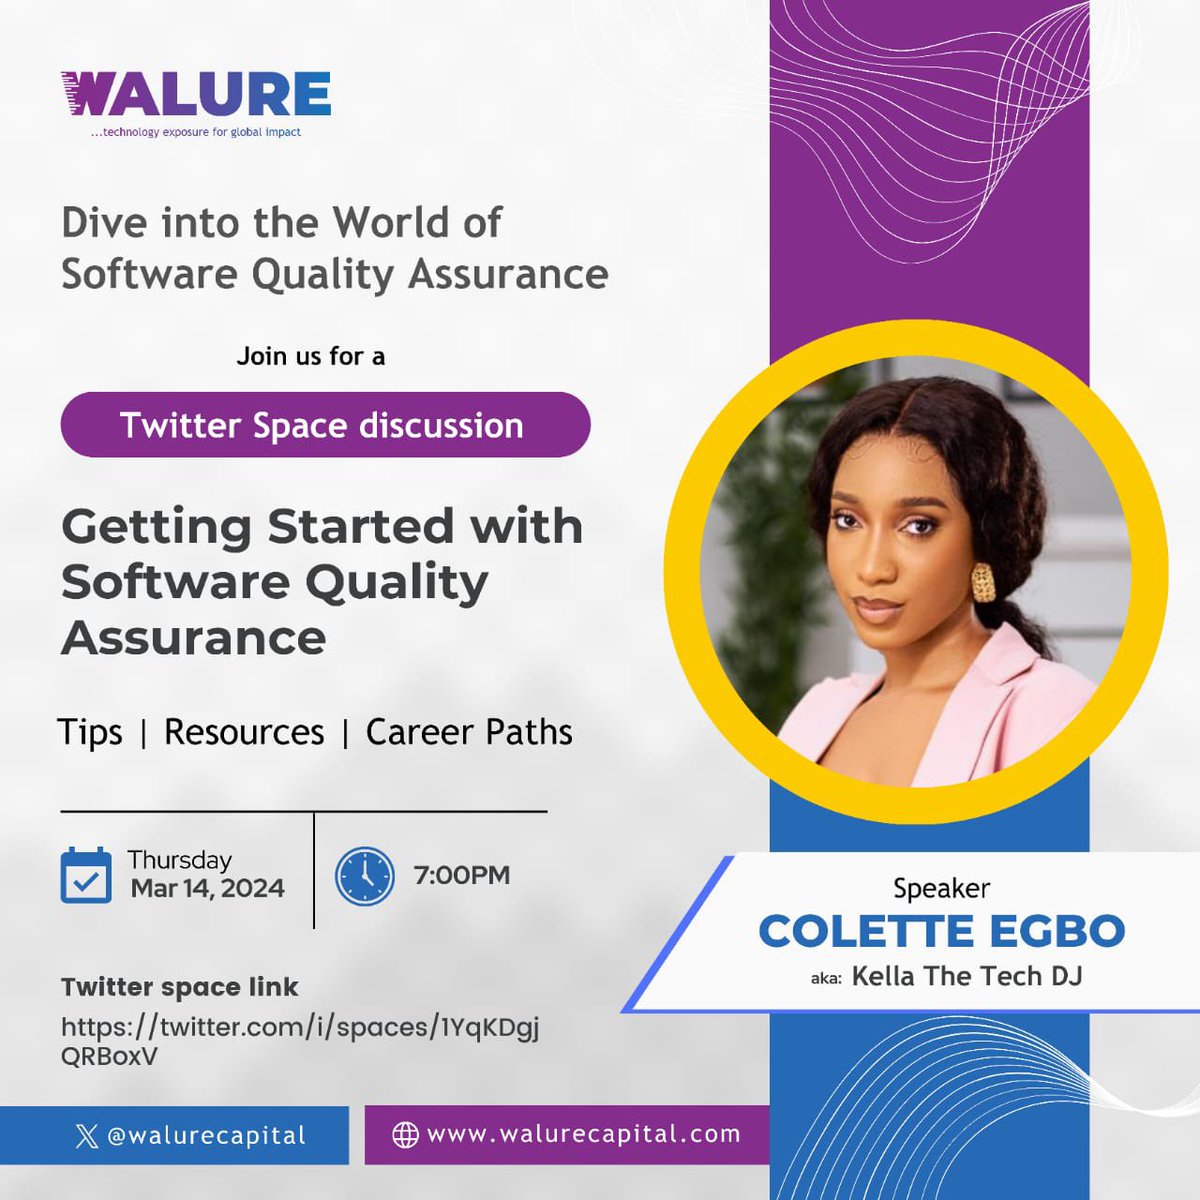 Calling on future testers! Join us @walurecapital on Thursday 7pm WAT as I give tips on how to break into the Software Quality Assurance path and climb the ladder to success.